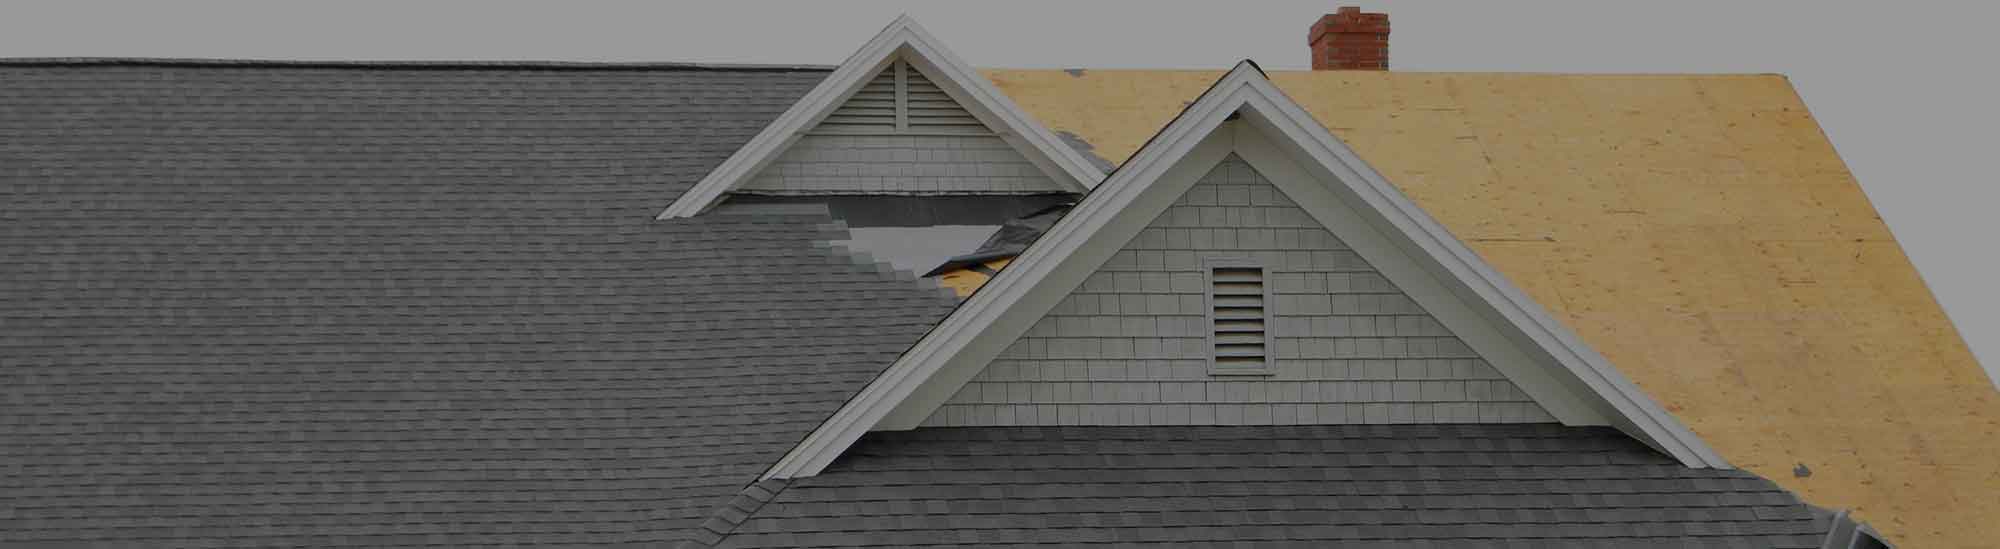 Residential Roofing in Southern Maryland